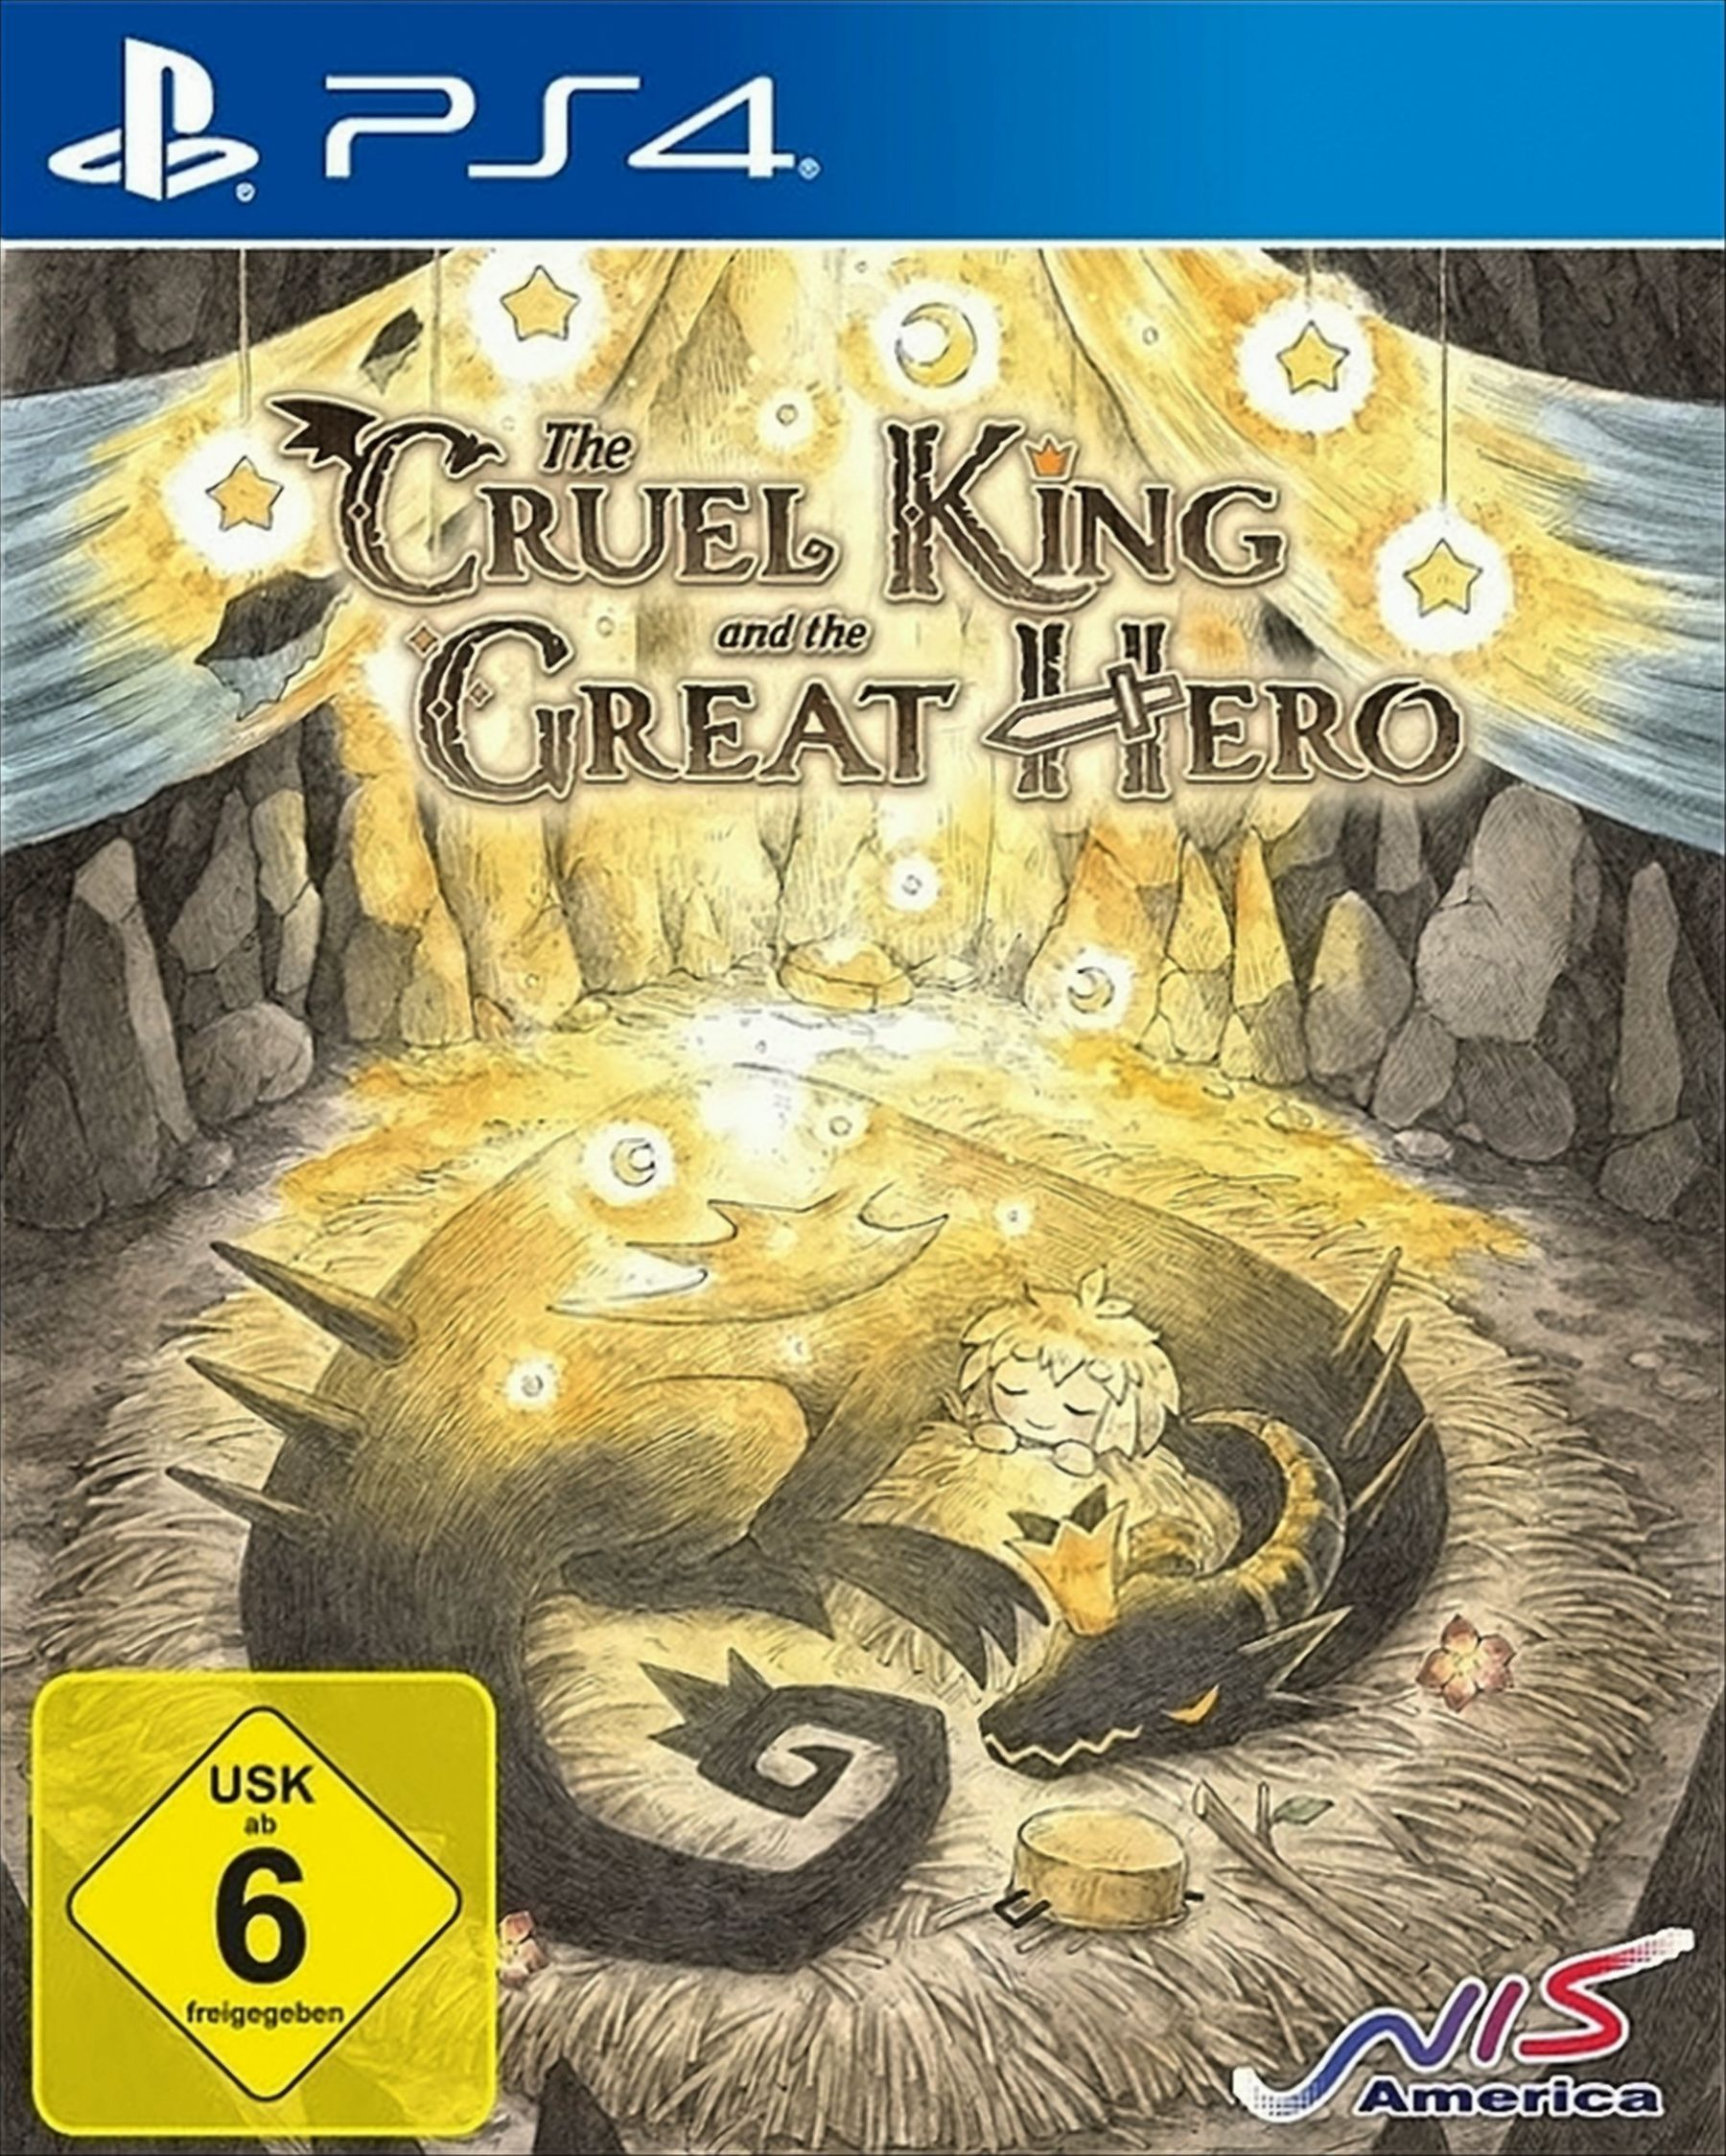 The Cruel Edition Hero the - 4] and Storybook Great [PlayStation - King